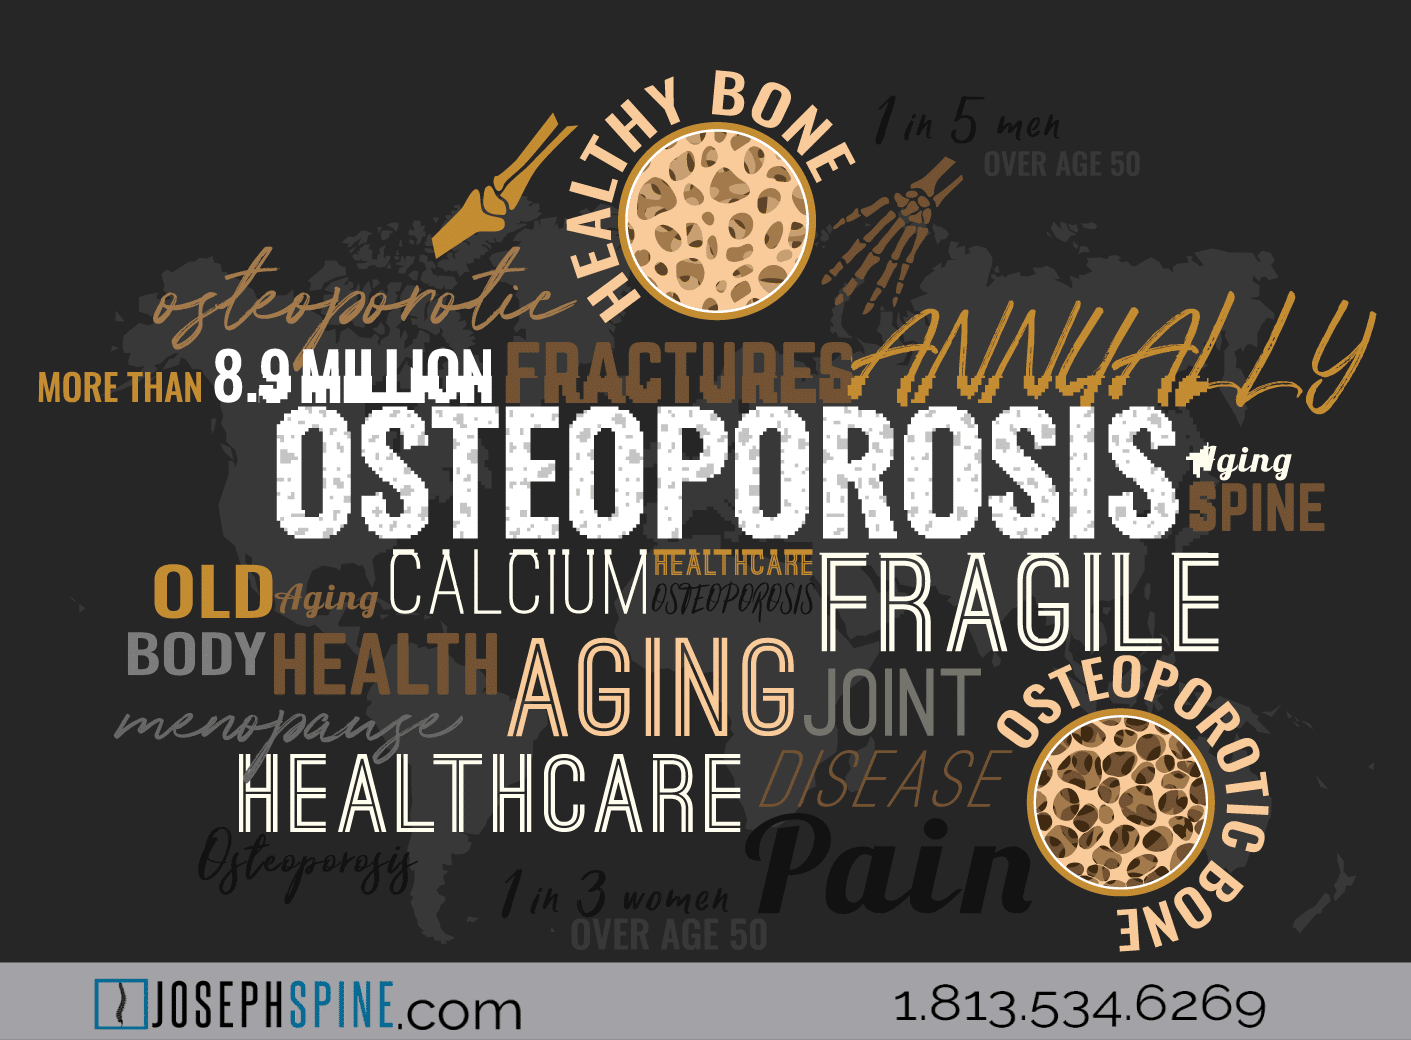 Osteoporosis is a disease of the bone, which literally means porous bone, and is a disease in which the density and quality of bone are reduced. As bones become more porous and fragile, the risk of fracture is greatly increased.